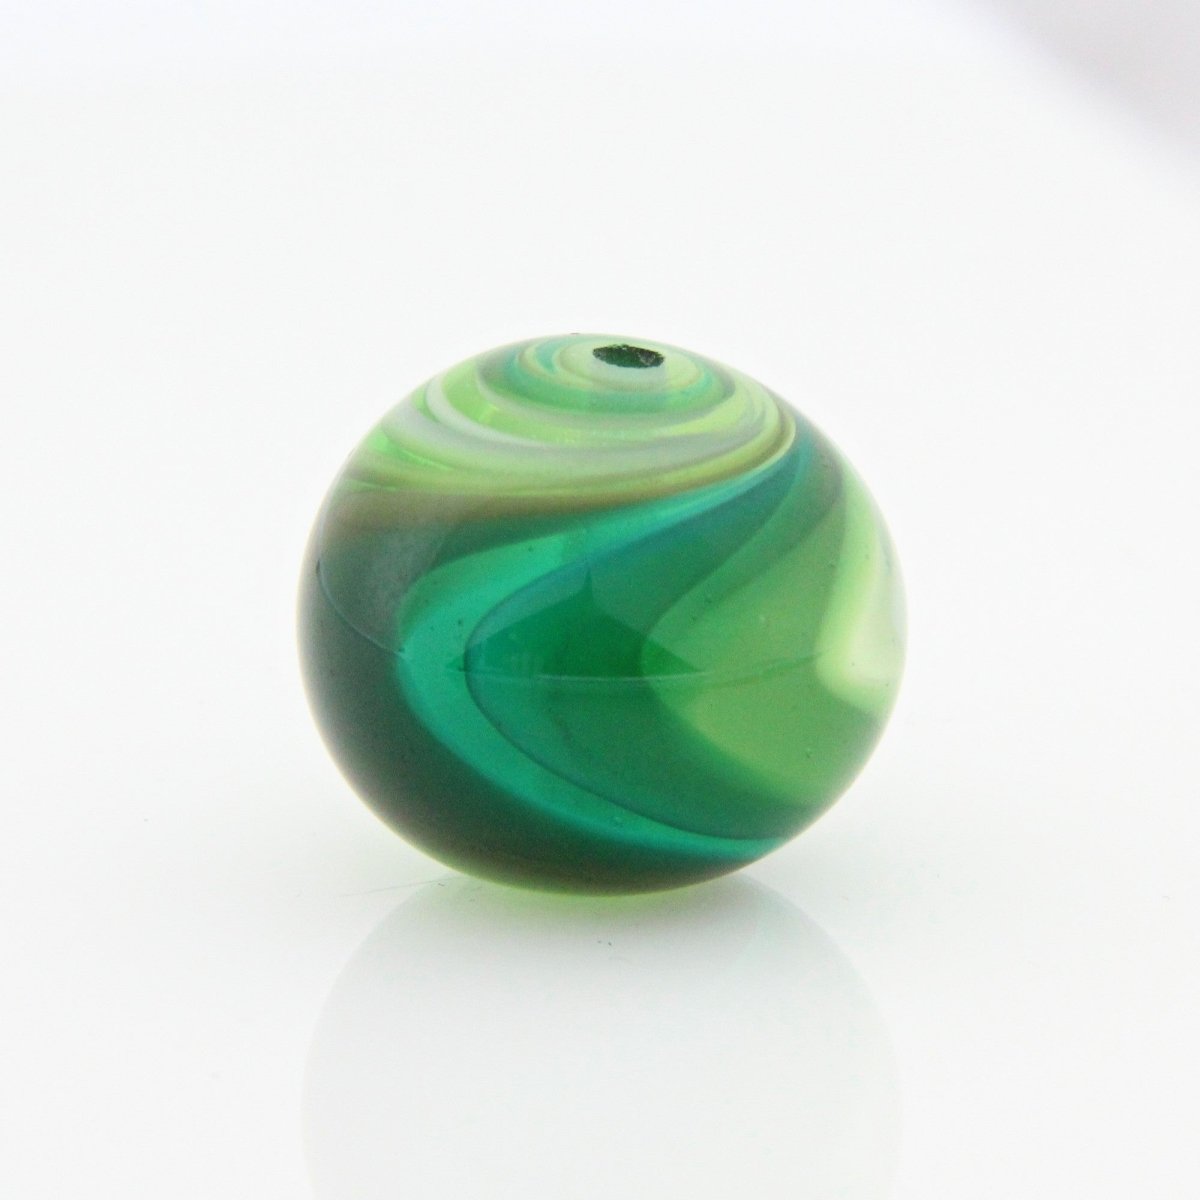 Green Striped Statement Bead - Handmade Glass Lampwork, Unique Focal Bead for Pendant, Suncatcher, or Home Decorating